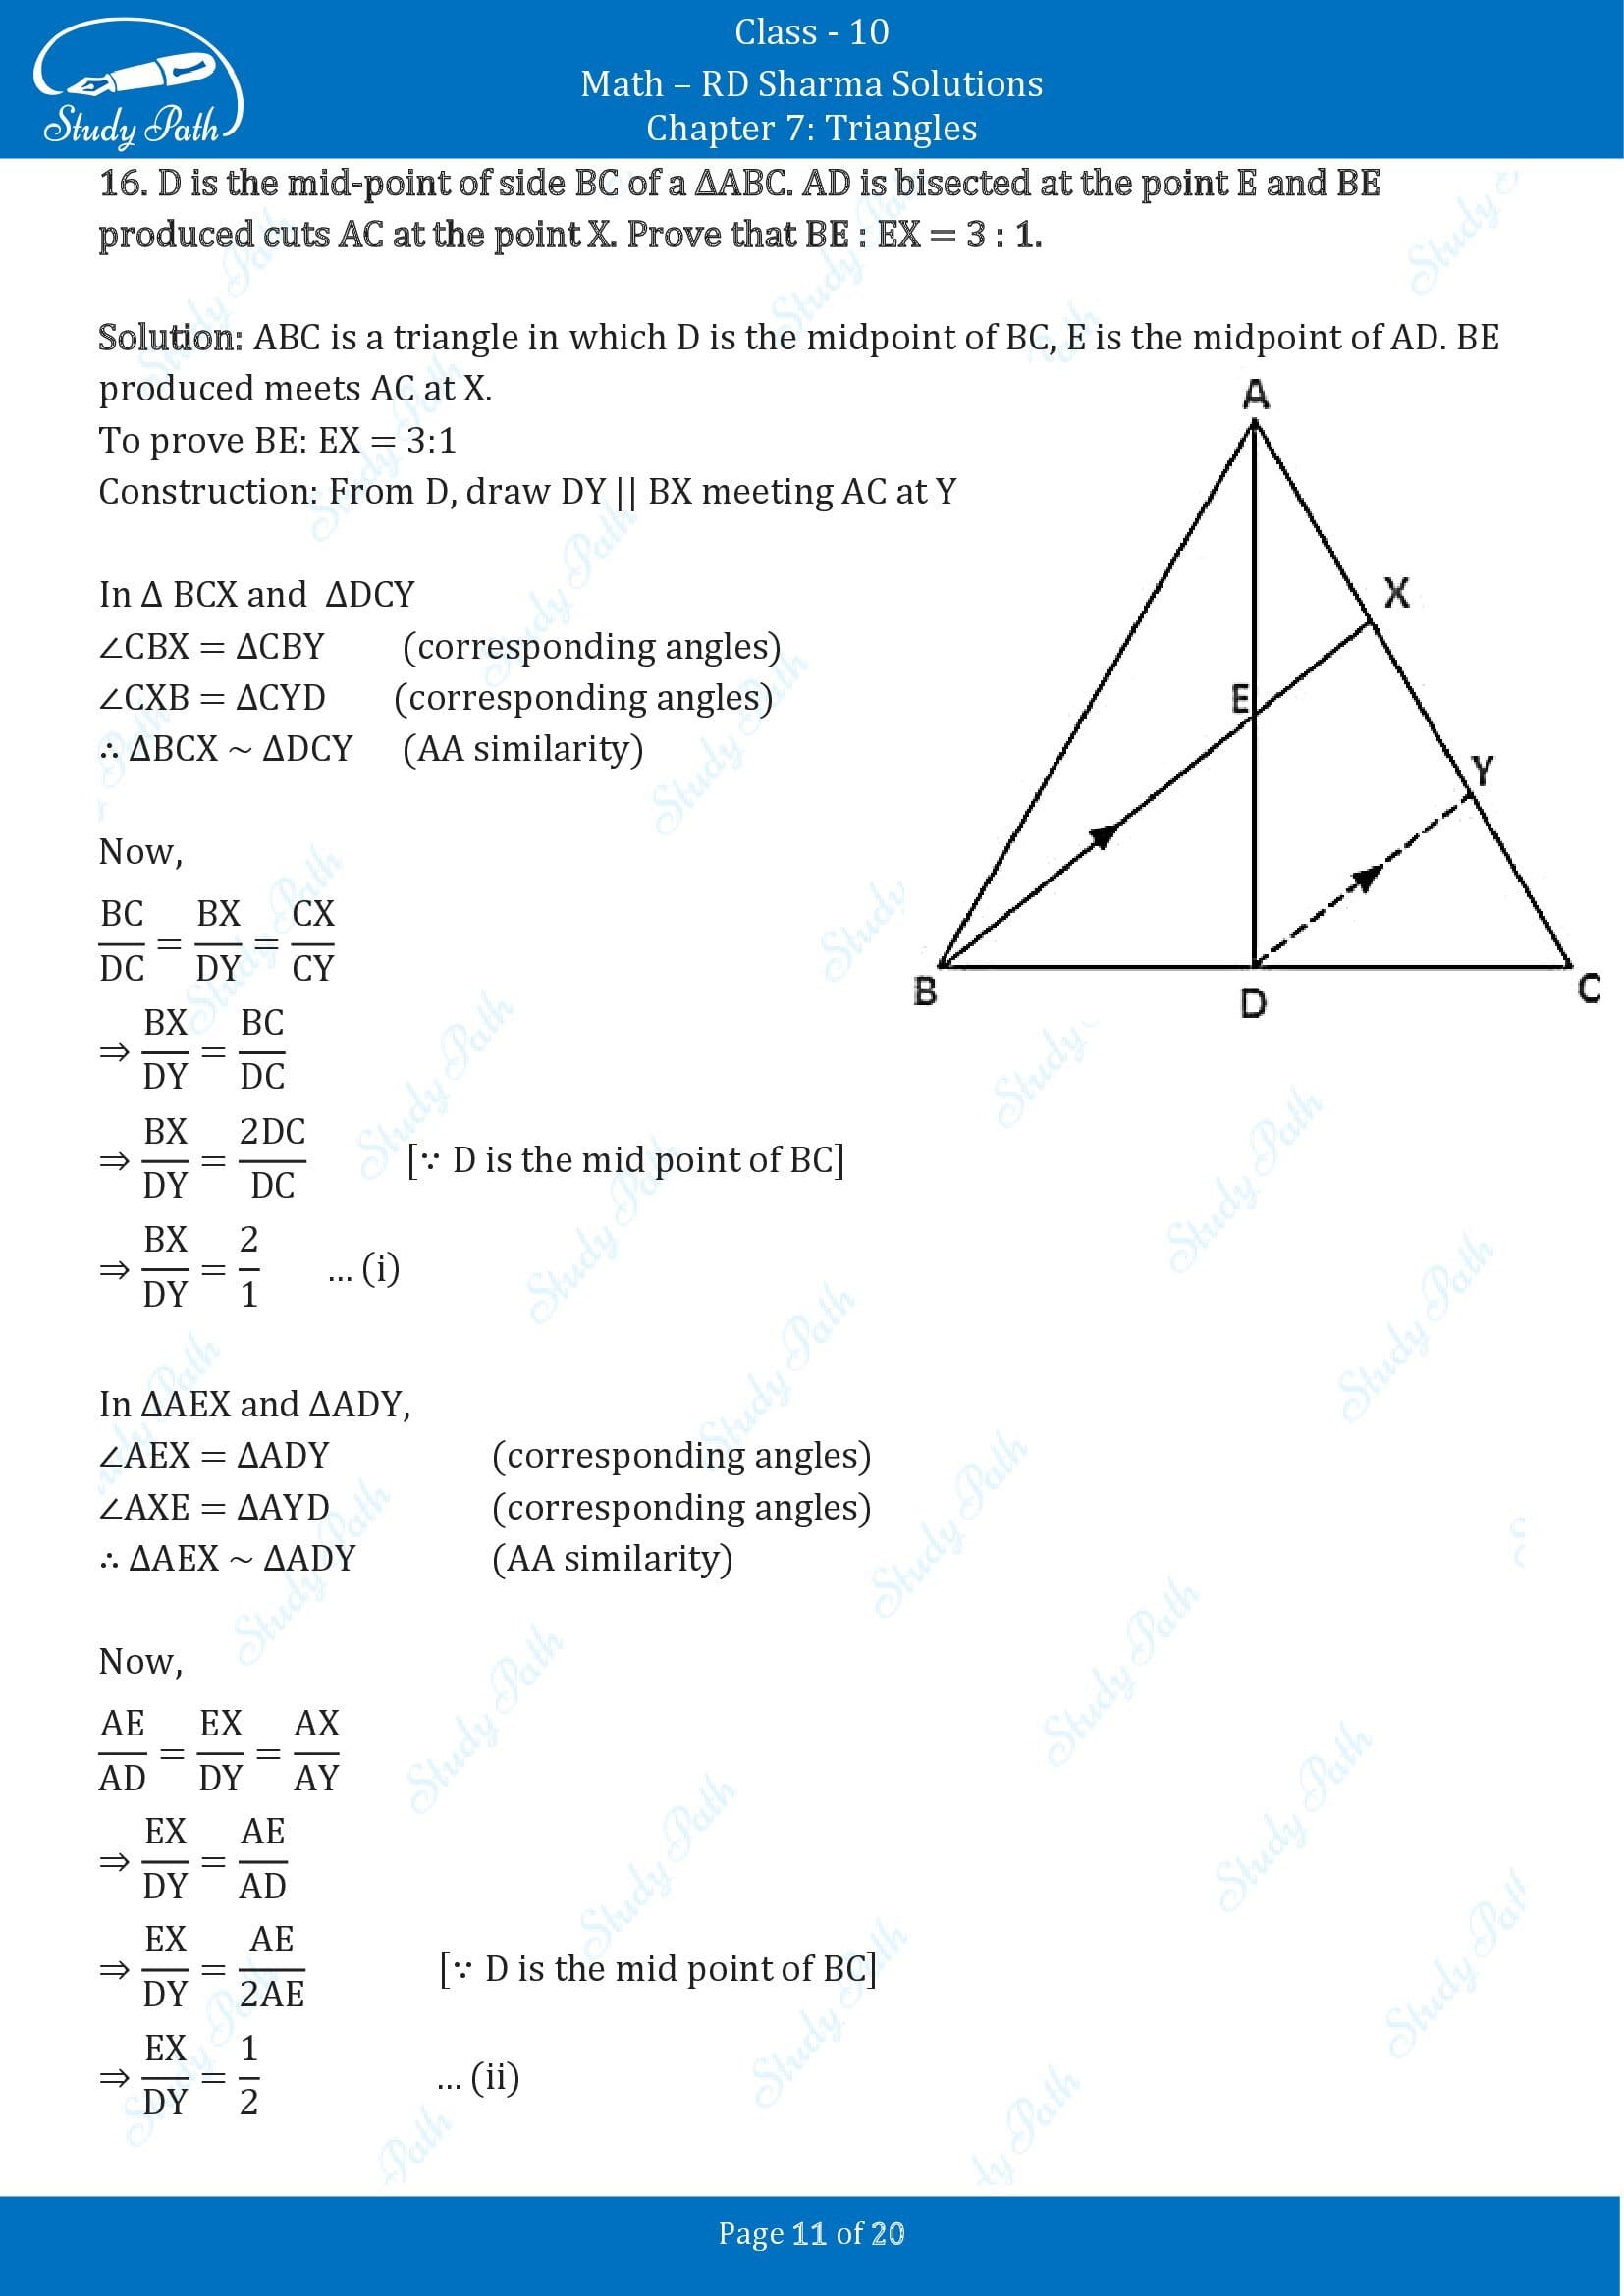 RD Sharma Solutions Class 10 Chapter 7 Triangles Exercise 7.5 00011